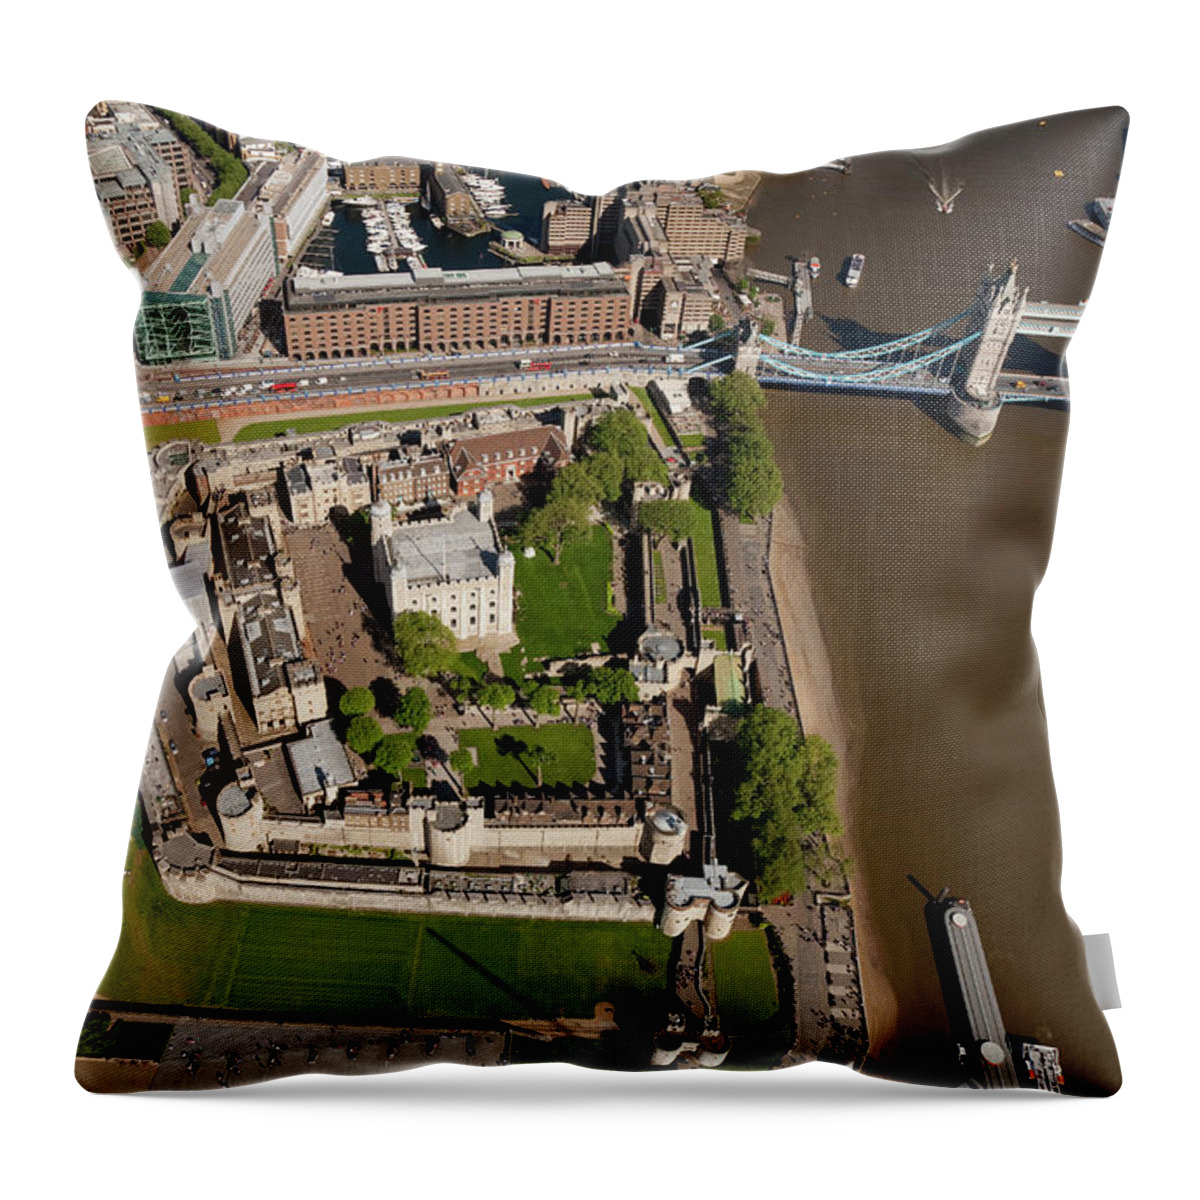 English Culture Throw Pillow featuring the photograph Aerial Shot Of Tower Bridge And Tower by Michael Dunning